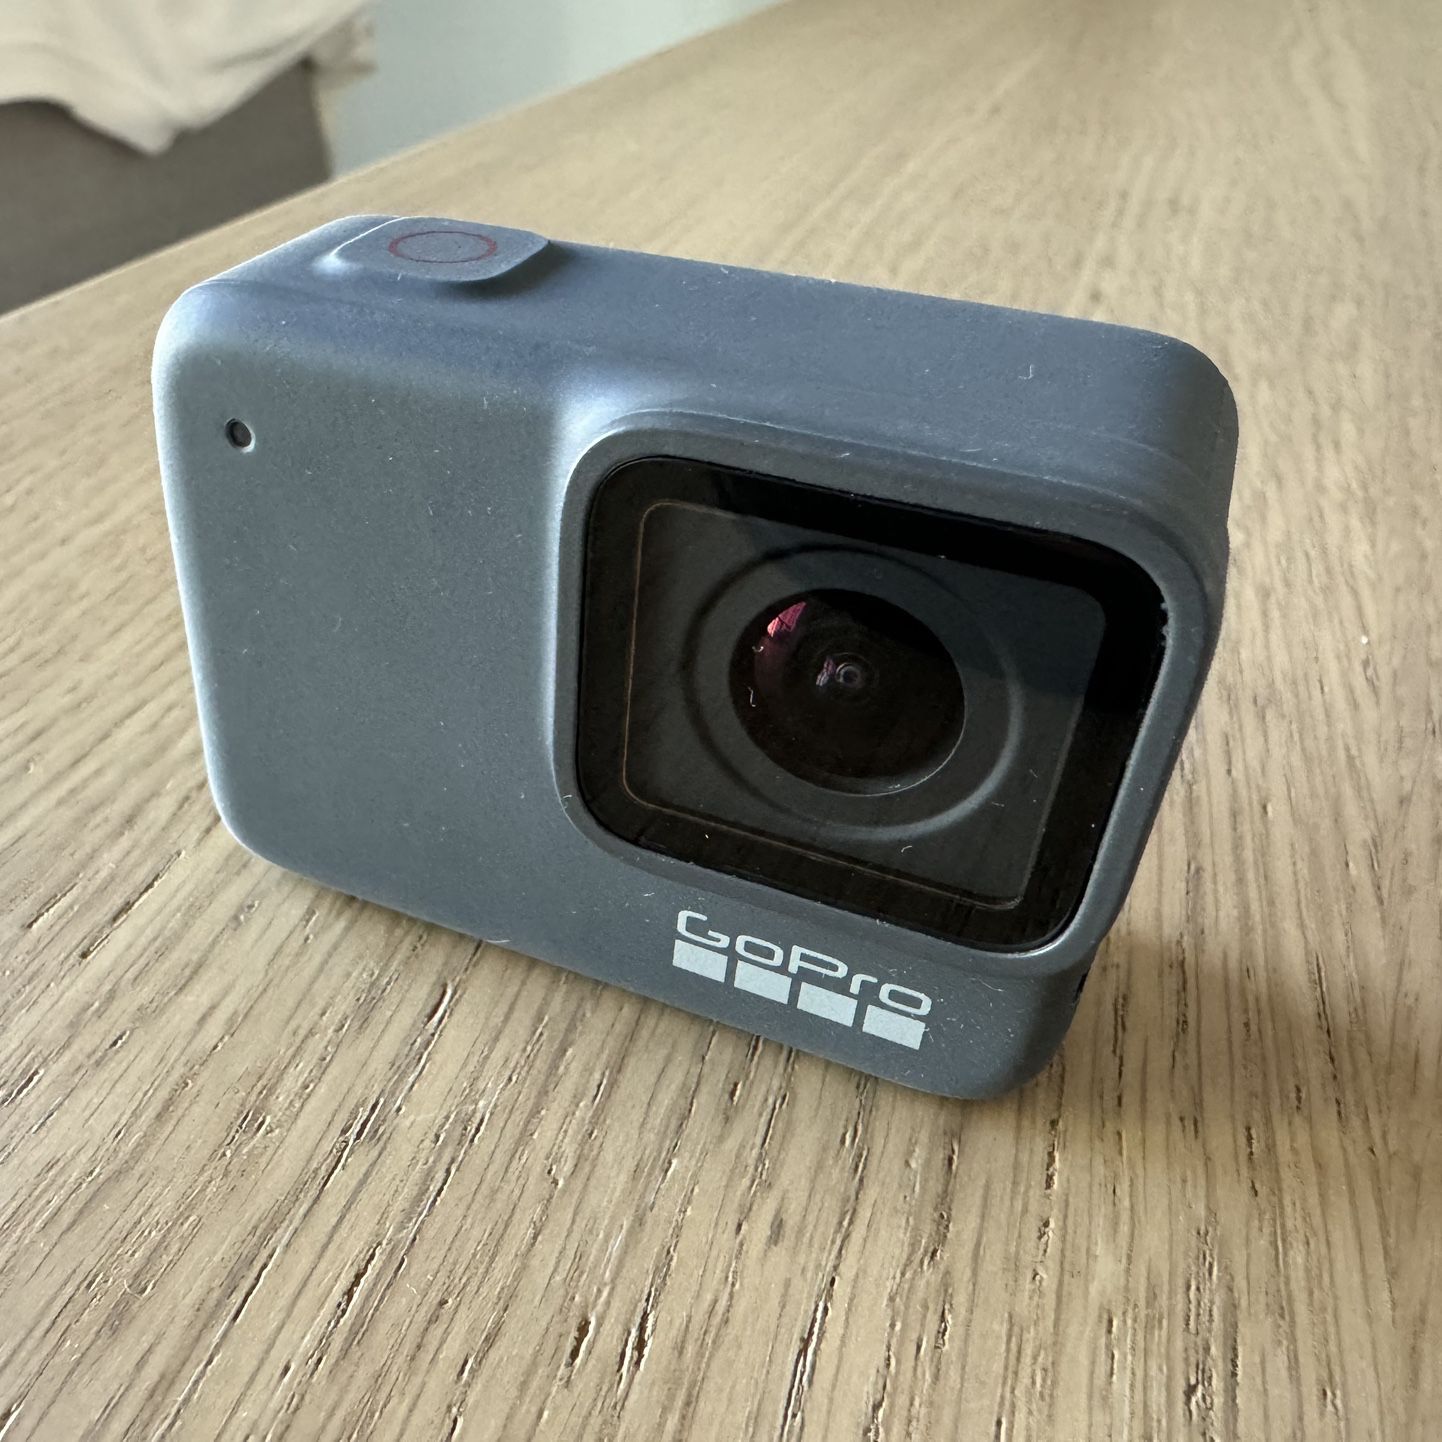 GoPro Hero 7 With Touchscreen and Case